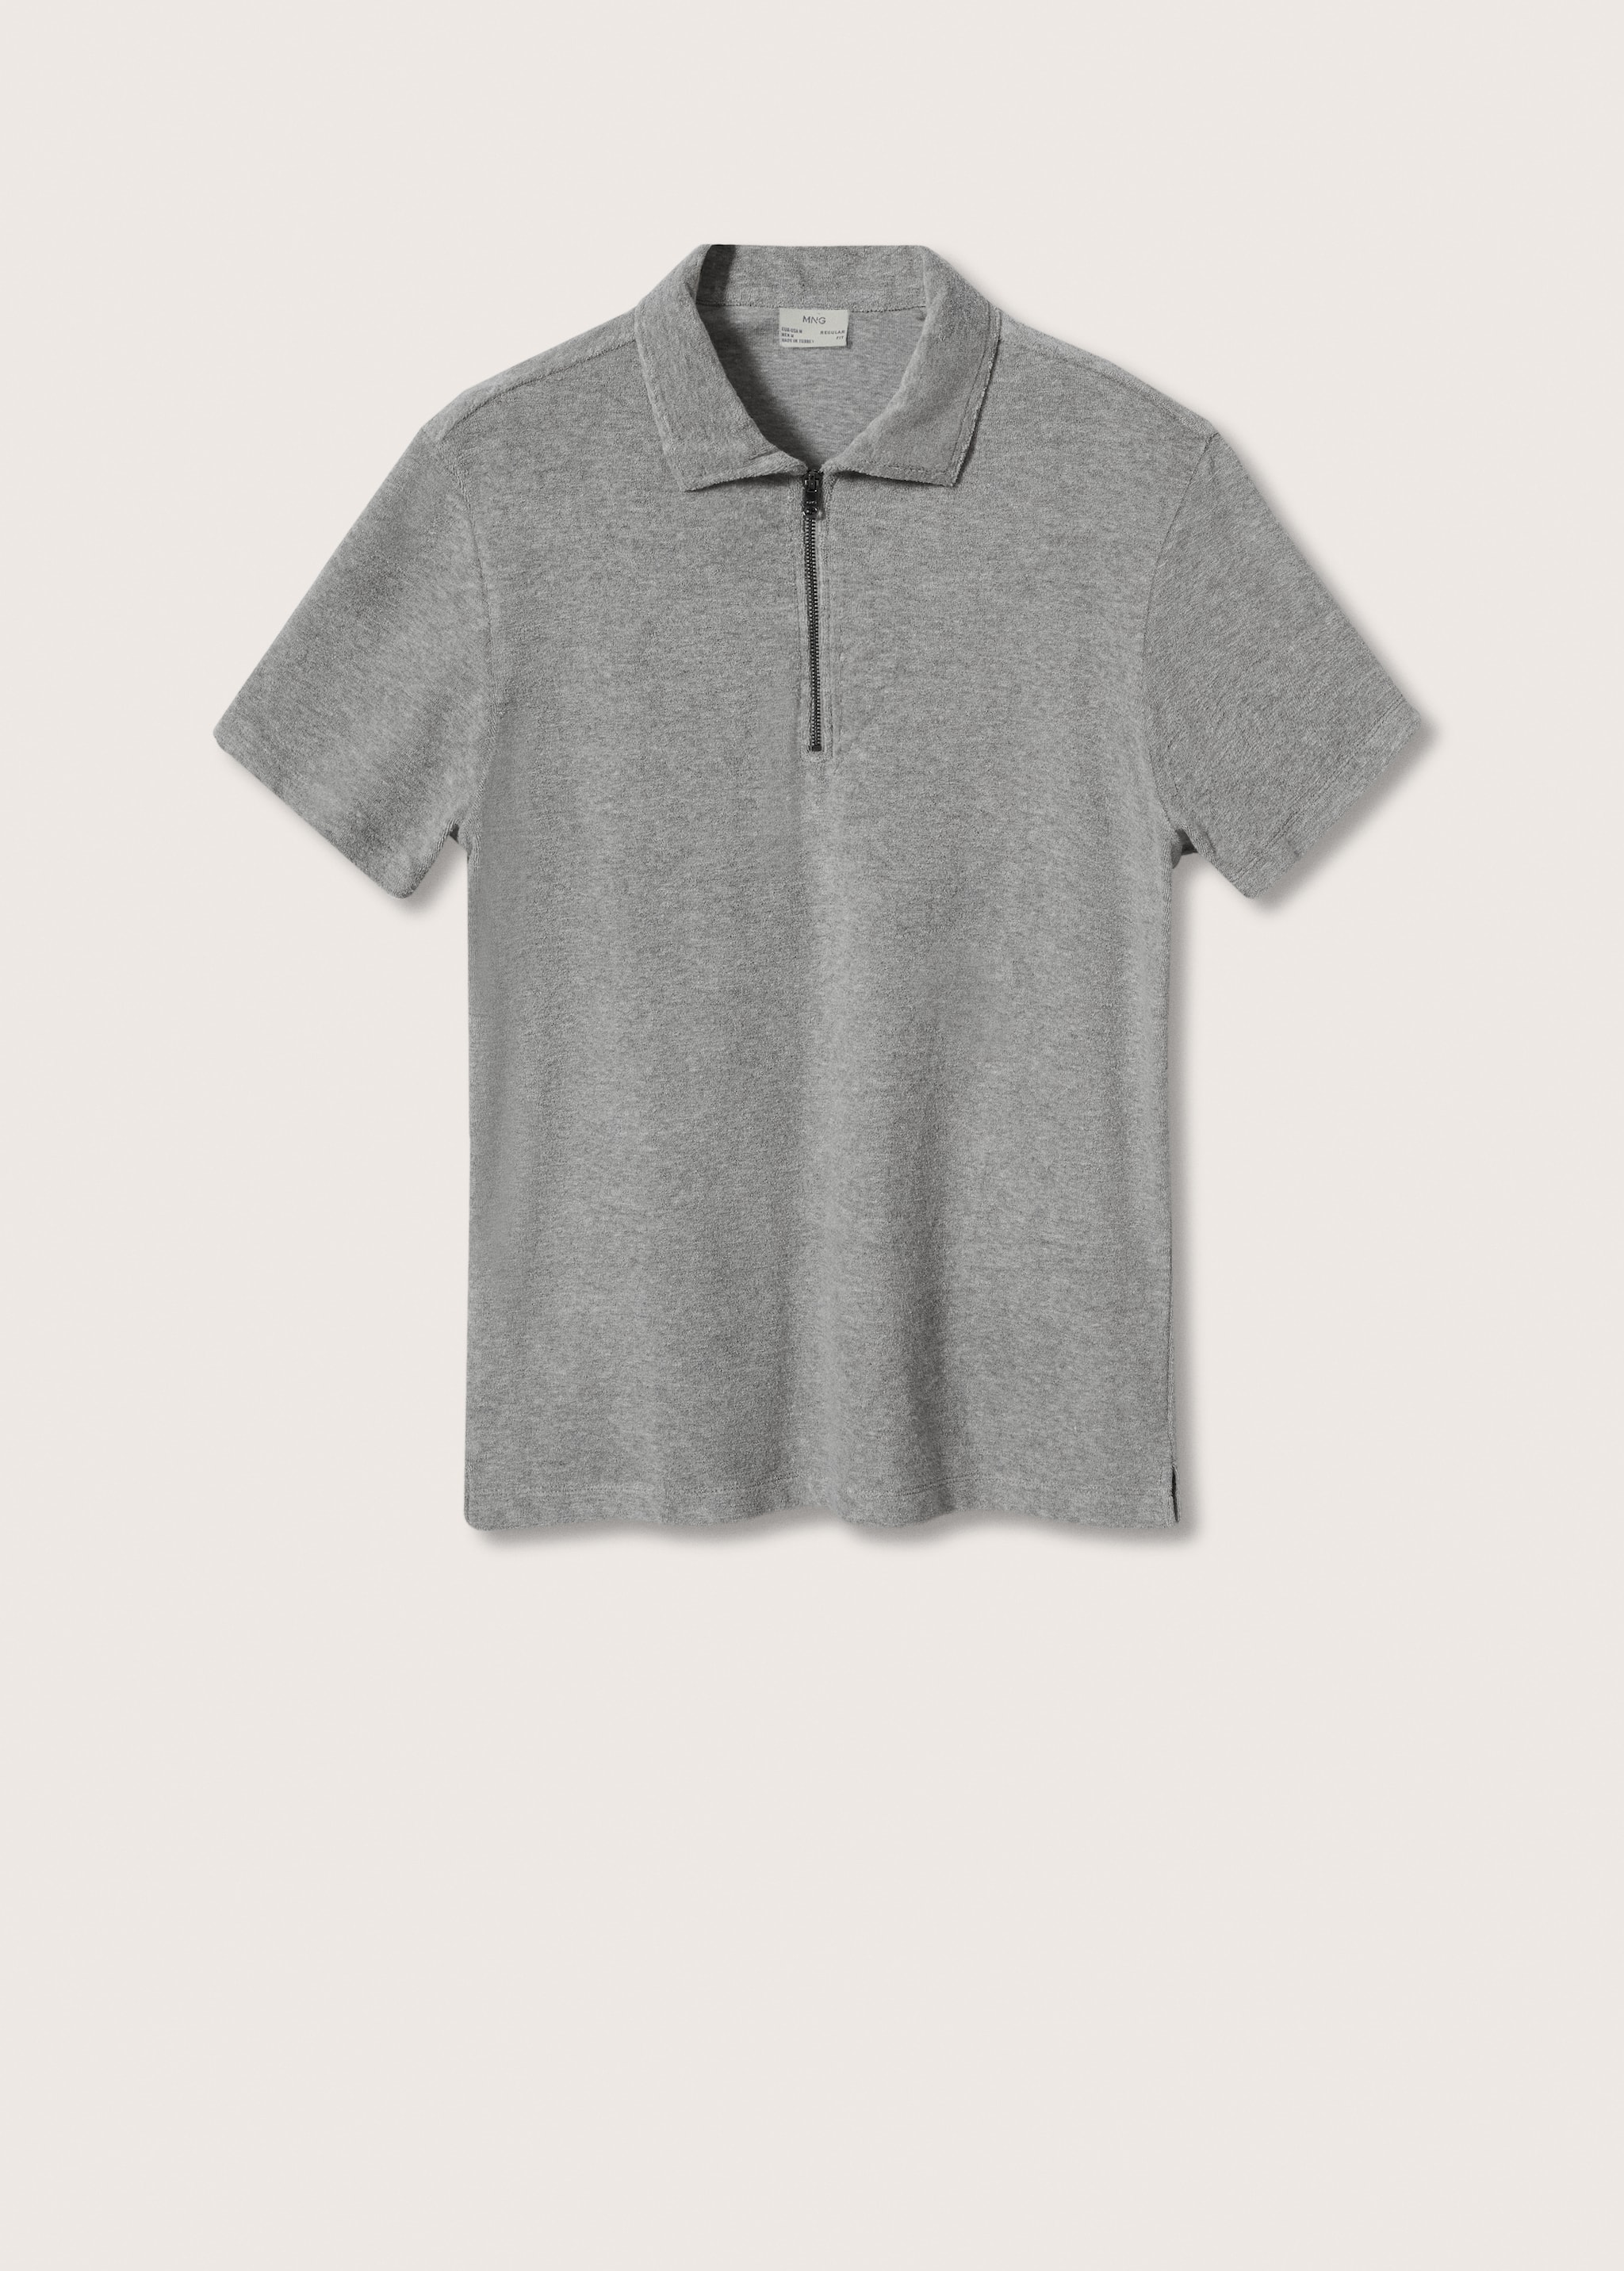 Cotton towel texture polo shirt - Article without model